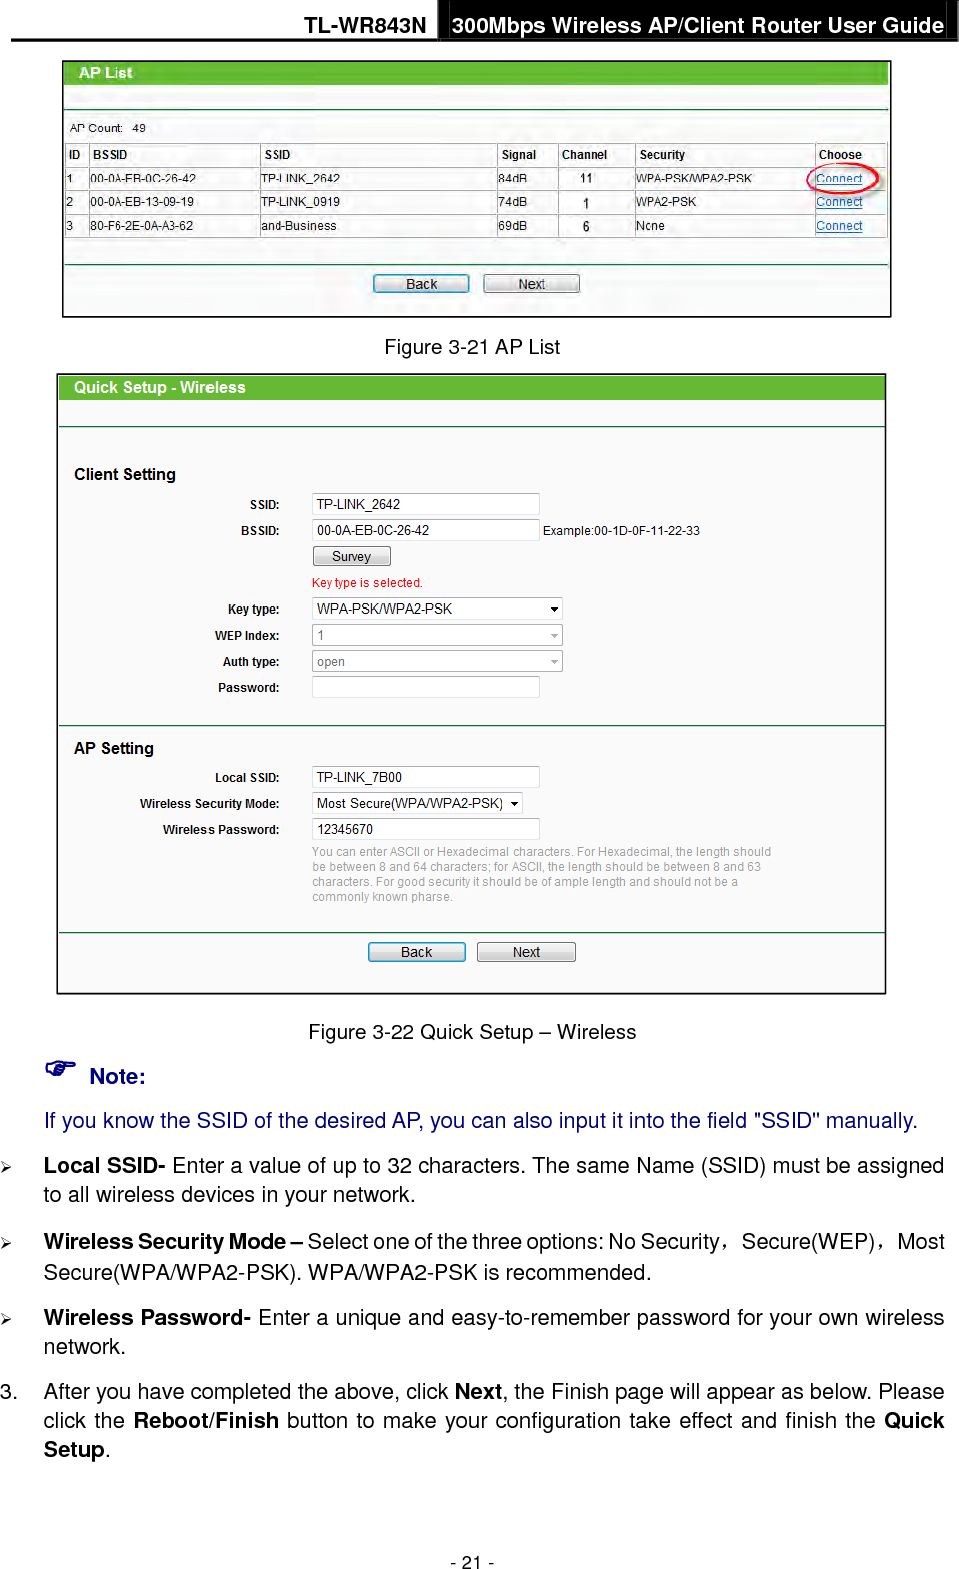 TL-WR843N 300Mbps Wireless AP/Client Router User Guide - 21 - Figure 3-21 AP List Figure 3-22 Quick Setup – Wireless  Note:If you know the SSID of the desired AP, you can also input it into the field &quot;SSID&quot; manually. Local SSID- Enter a value of up to 32 characters. The same Name (SSID) must be assignedto all wireless devices in your network.Wireless Security Mode – Select one of the three options: No Security，Secure(WEP)，MostSecure(WPA/WPA2-PSK). WPA/WPA2-PSK is recommended.Wireless Password- Enter a unique and easy-to-remember password for your own wirelessnetwork.3. After you have completed the above, click Next, the Finish page will appear as below. Pleaseclick the Reboot/Finish button to make your configuration take effect and finish the QuickSetup.